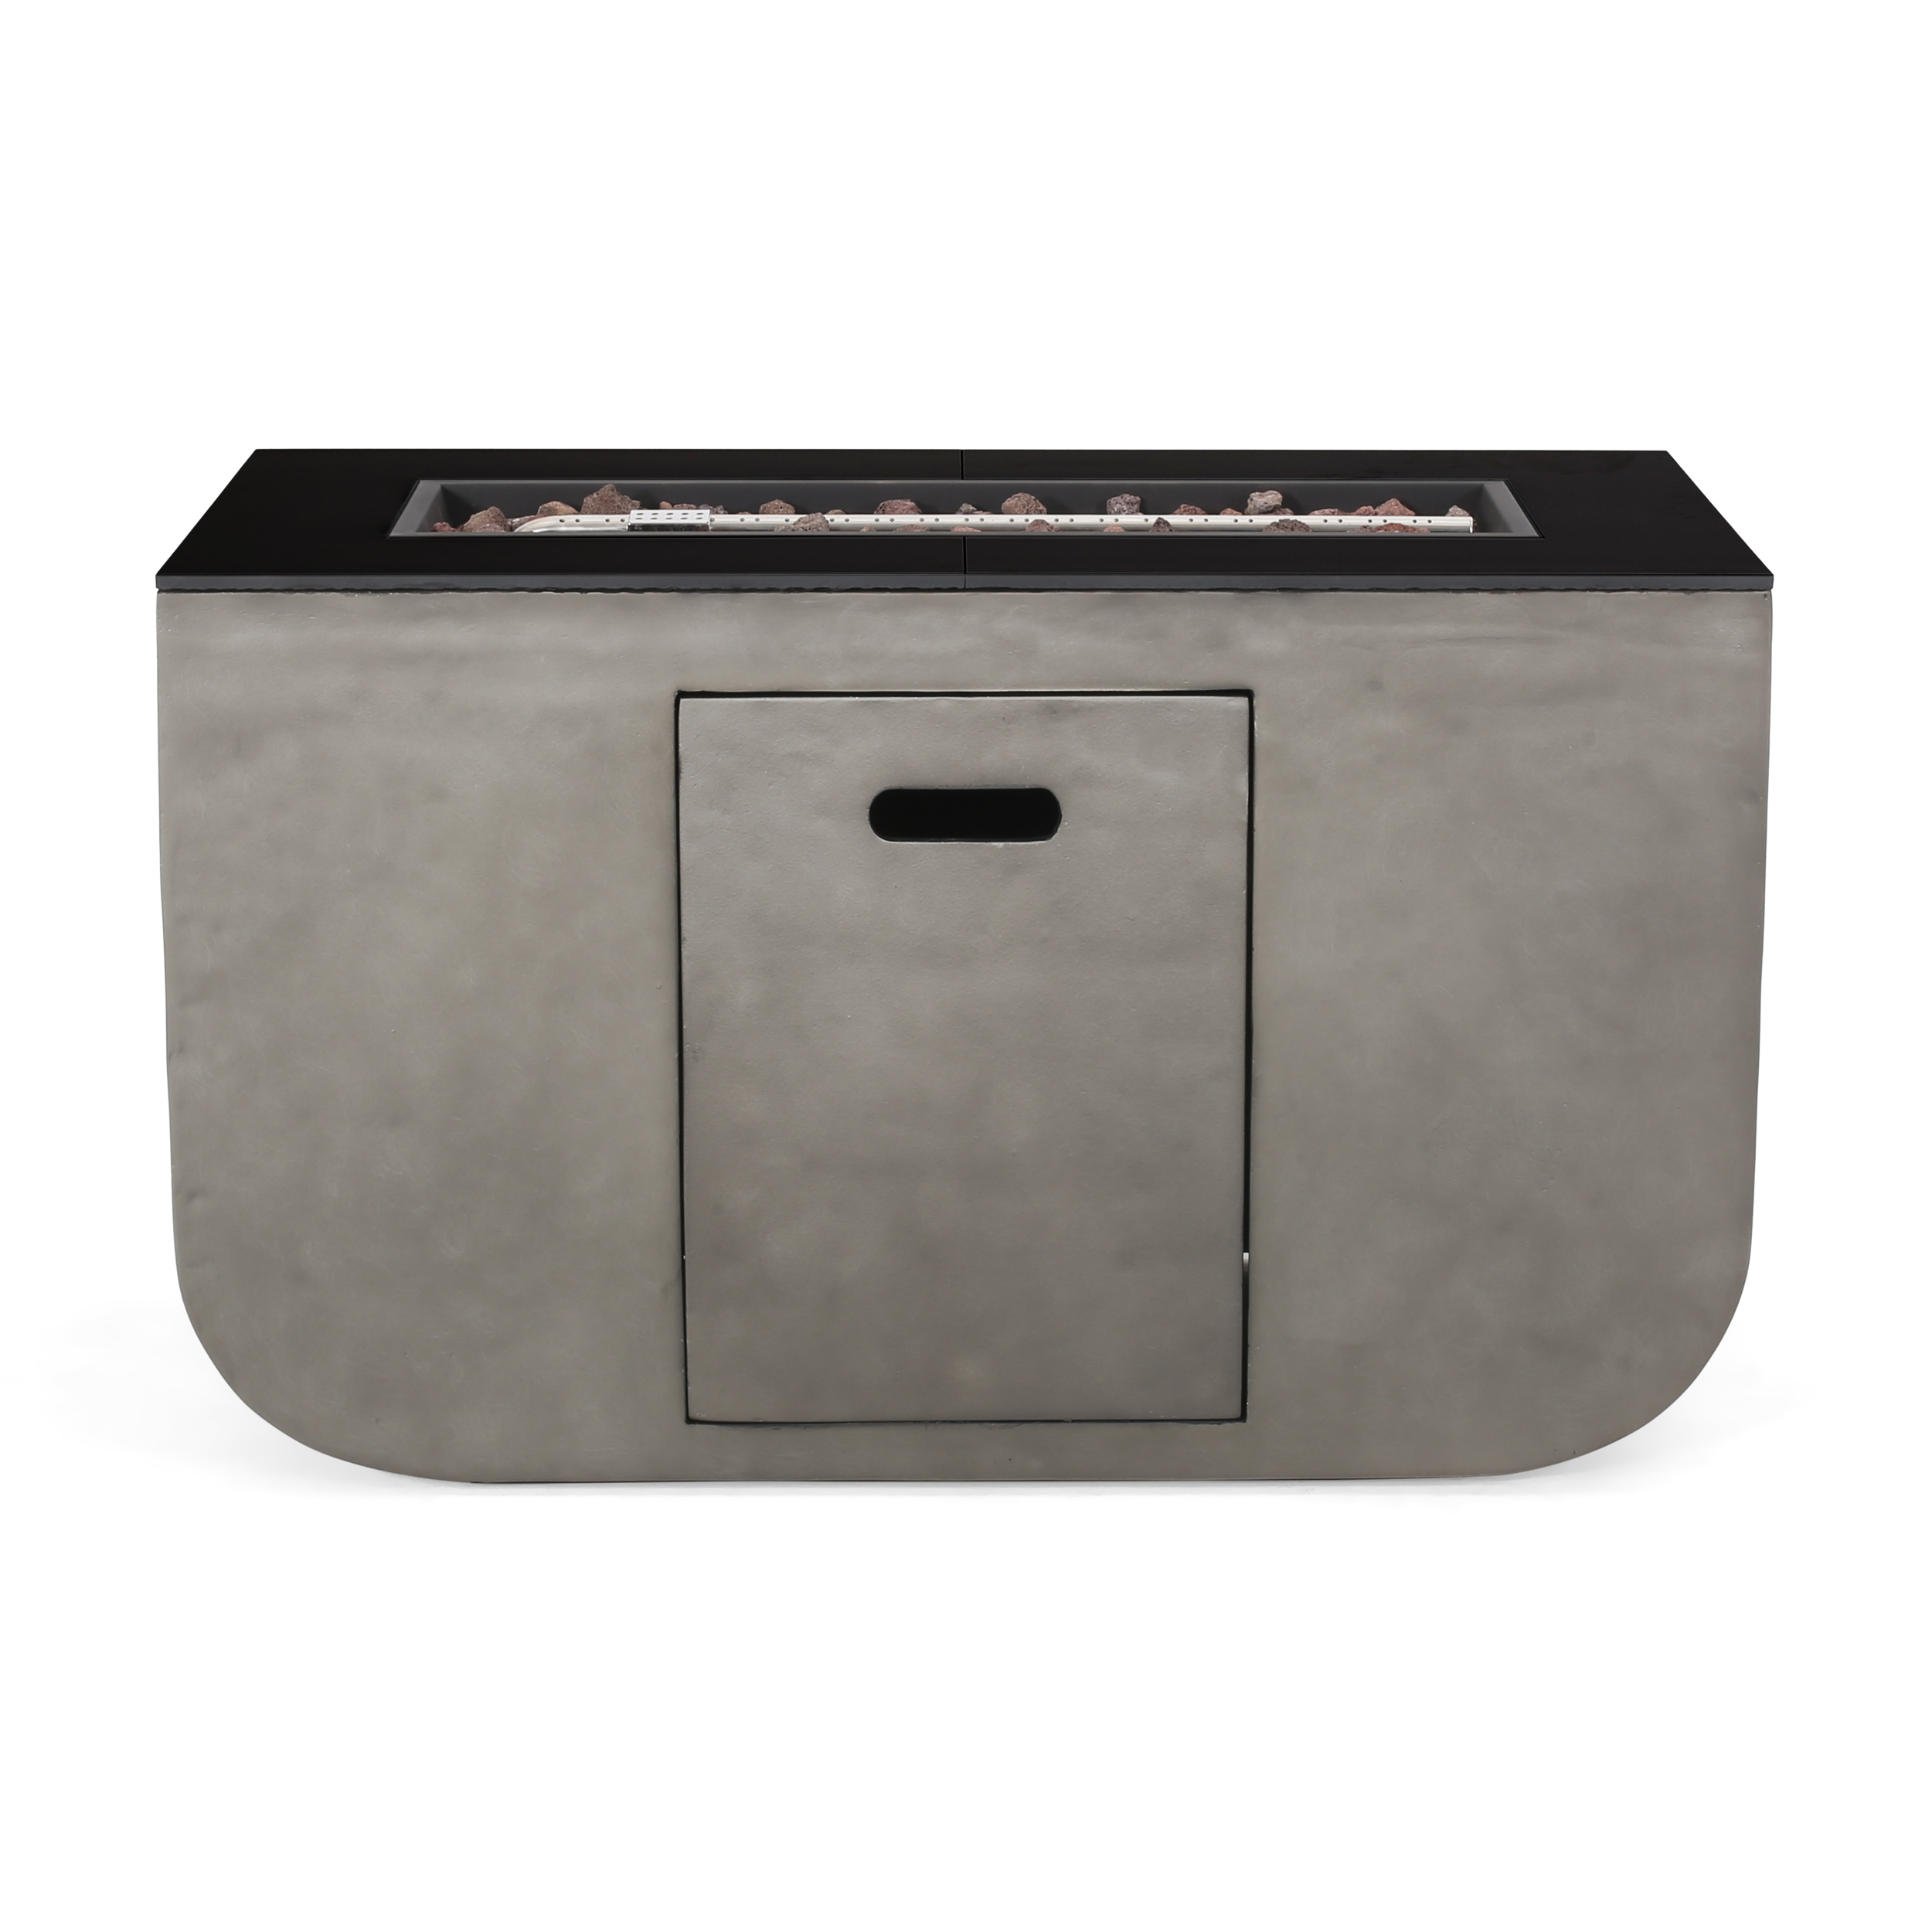 Noble House Adio 40" Rectangular Fire Pit in Light Gray and Black - image 5 of 8